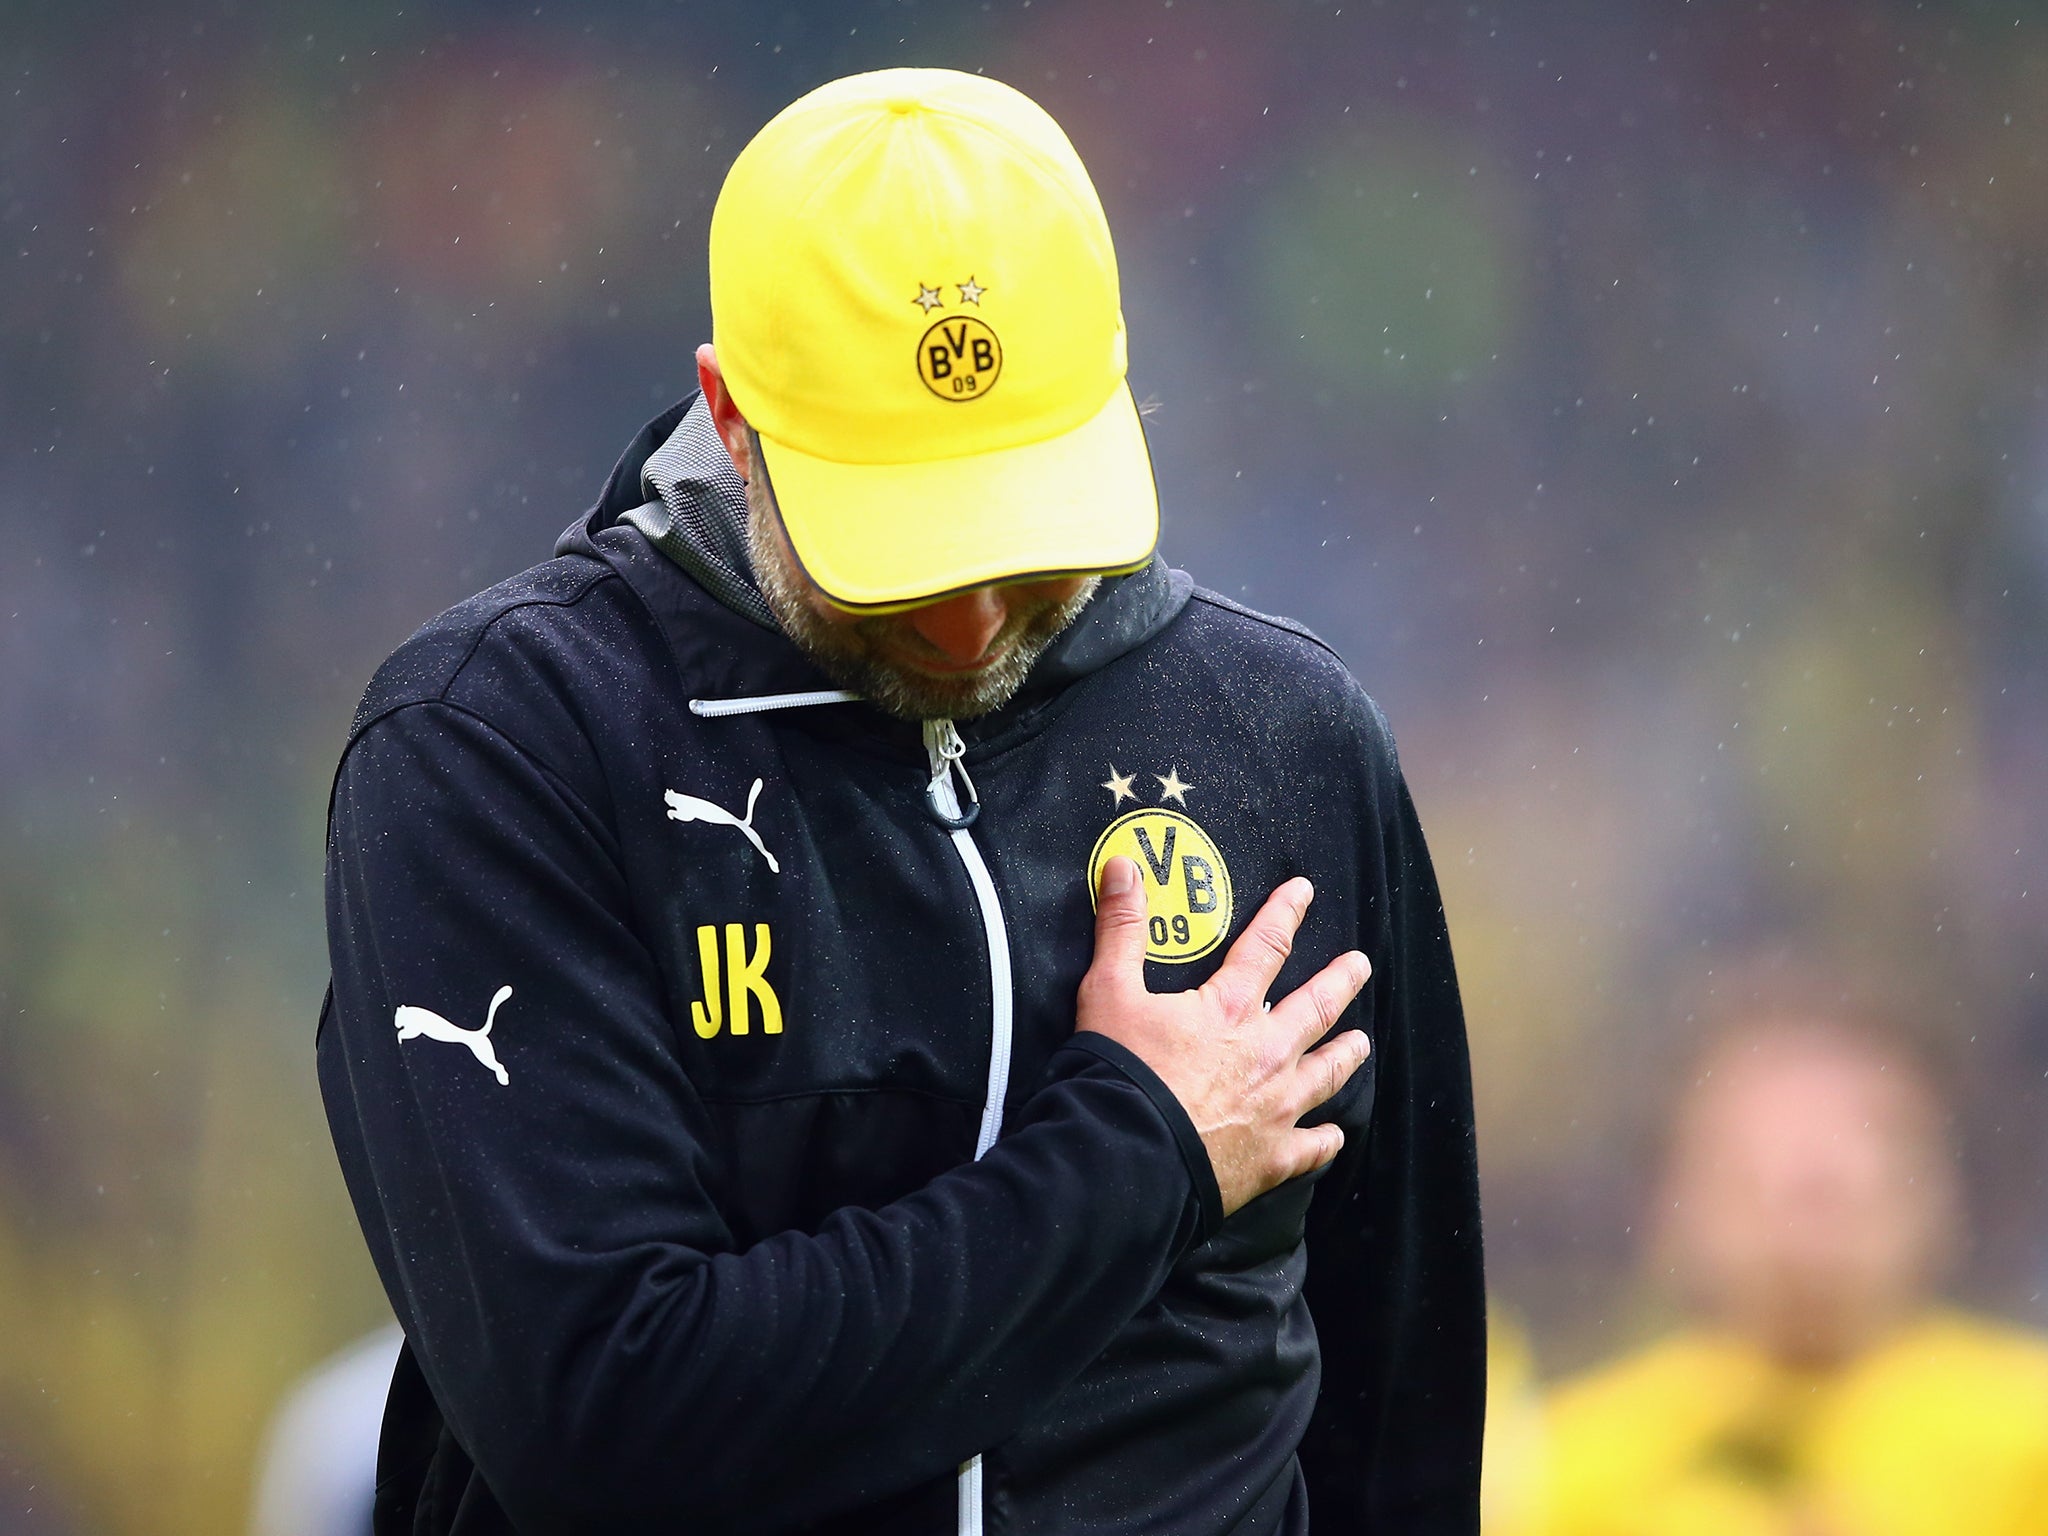 Klopp shows his emotions as he reacts to the crowd